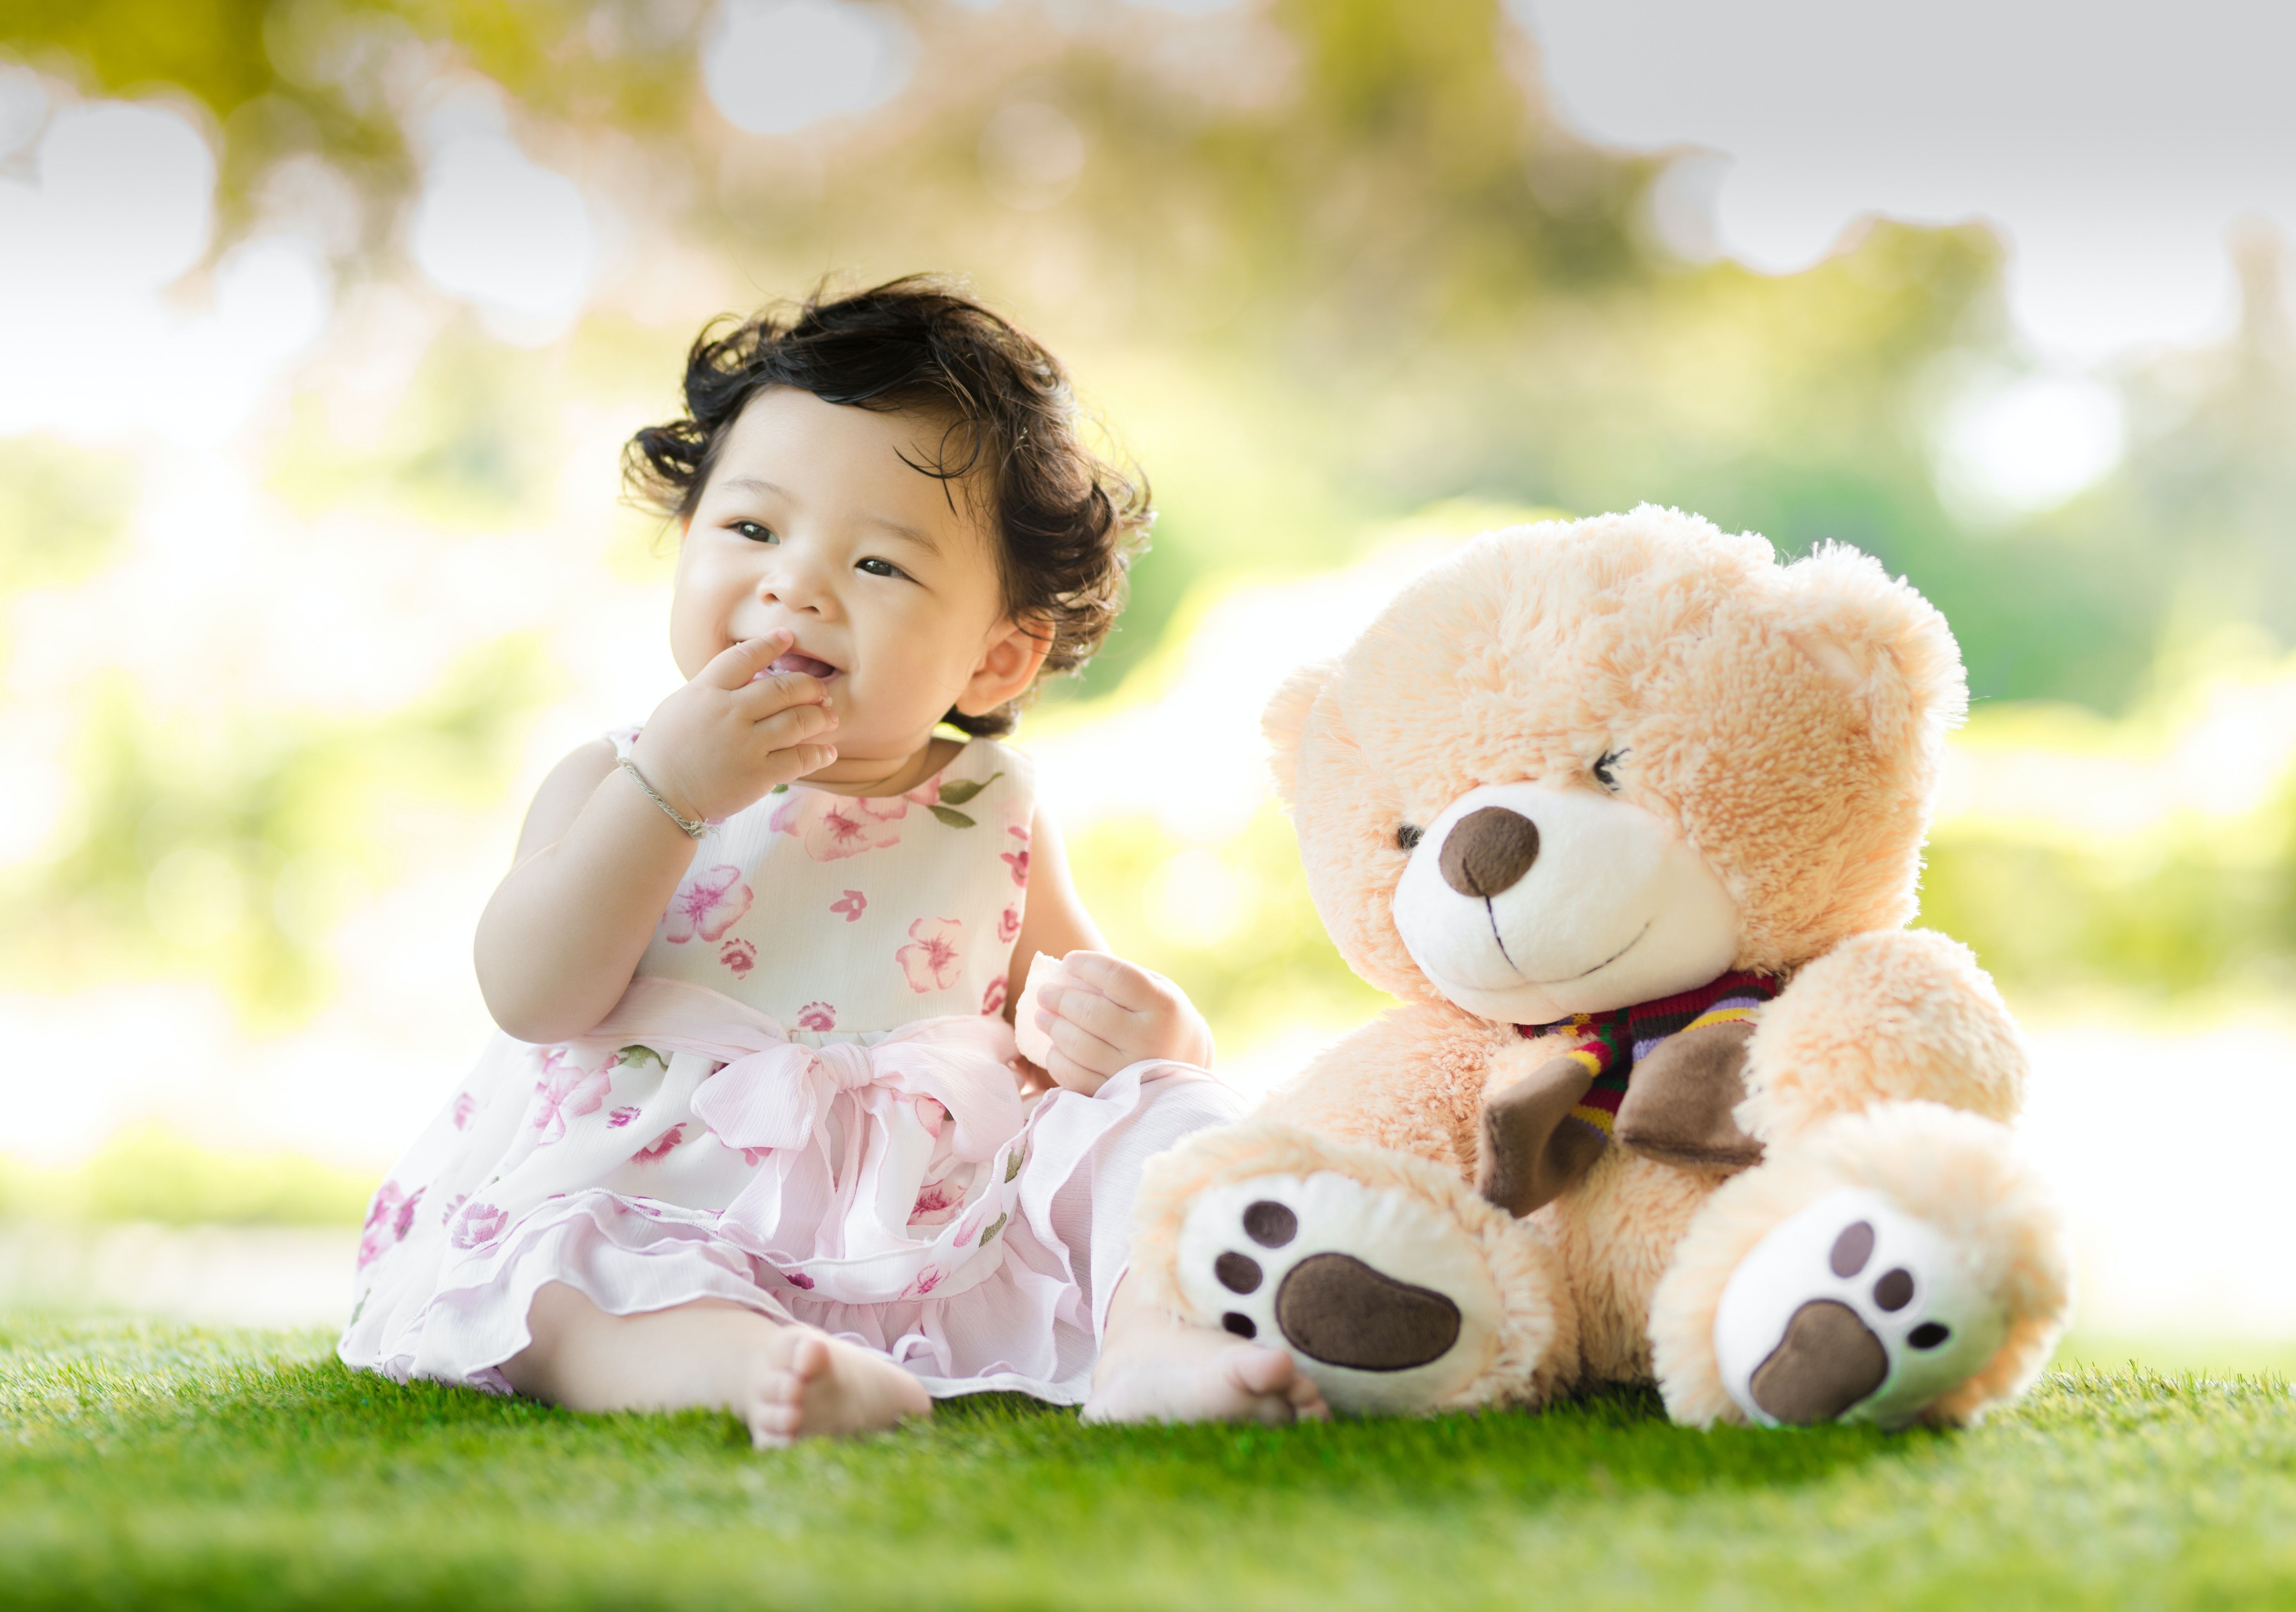 Photo by Singkham: https://www.pexels.com/photo/baby-sitting-on-green-grass-beside-bear-plush-toy-at-daytime-1166473/